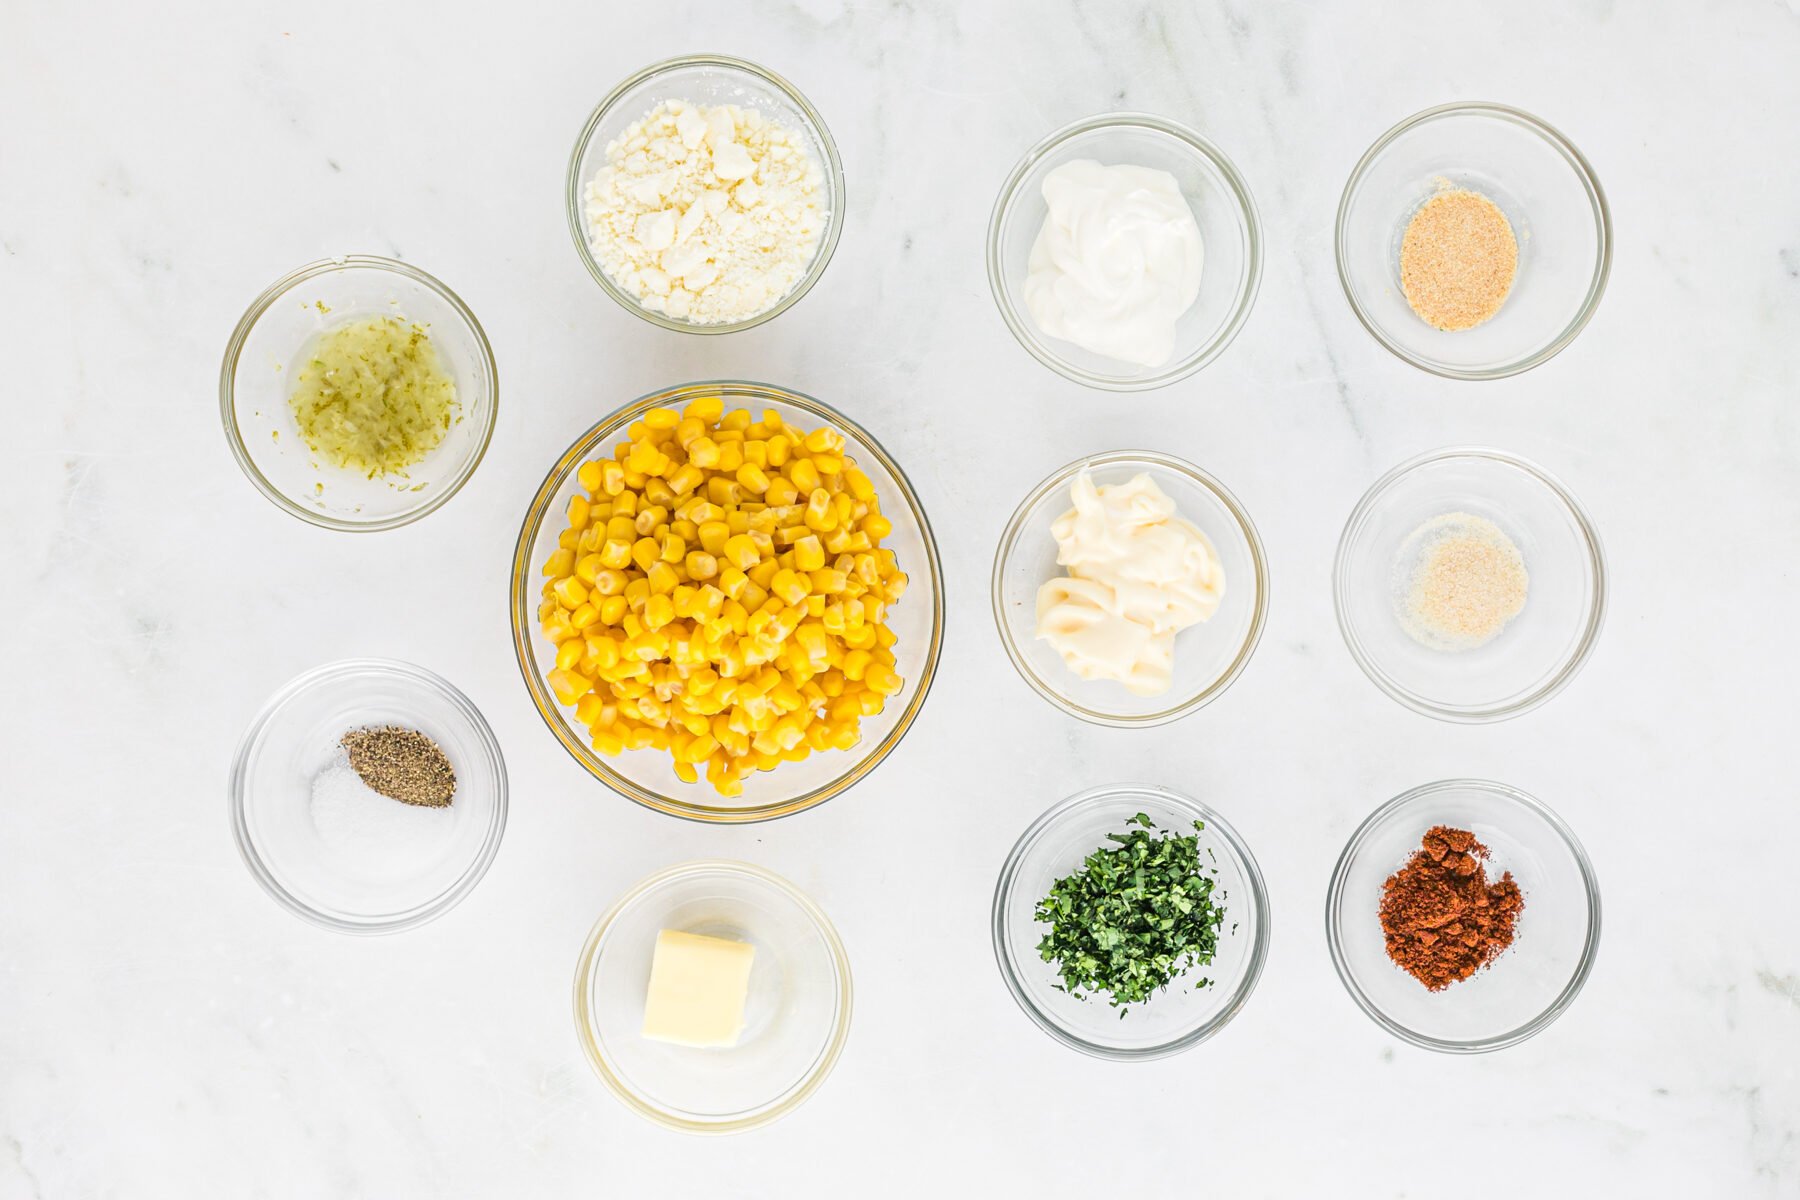 Corn, cheese, spices and cilantro in clear bowls on a white background before combining into a dip